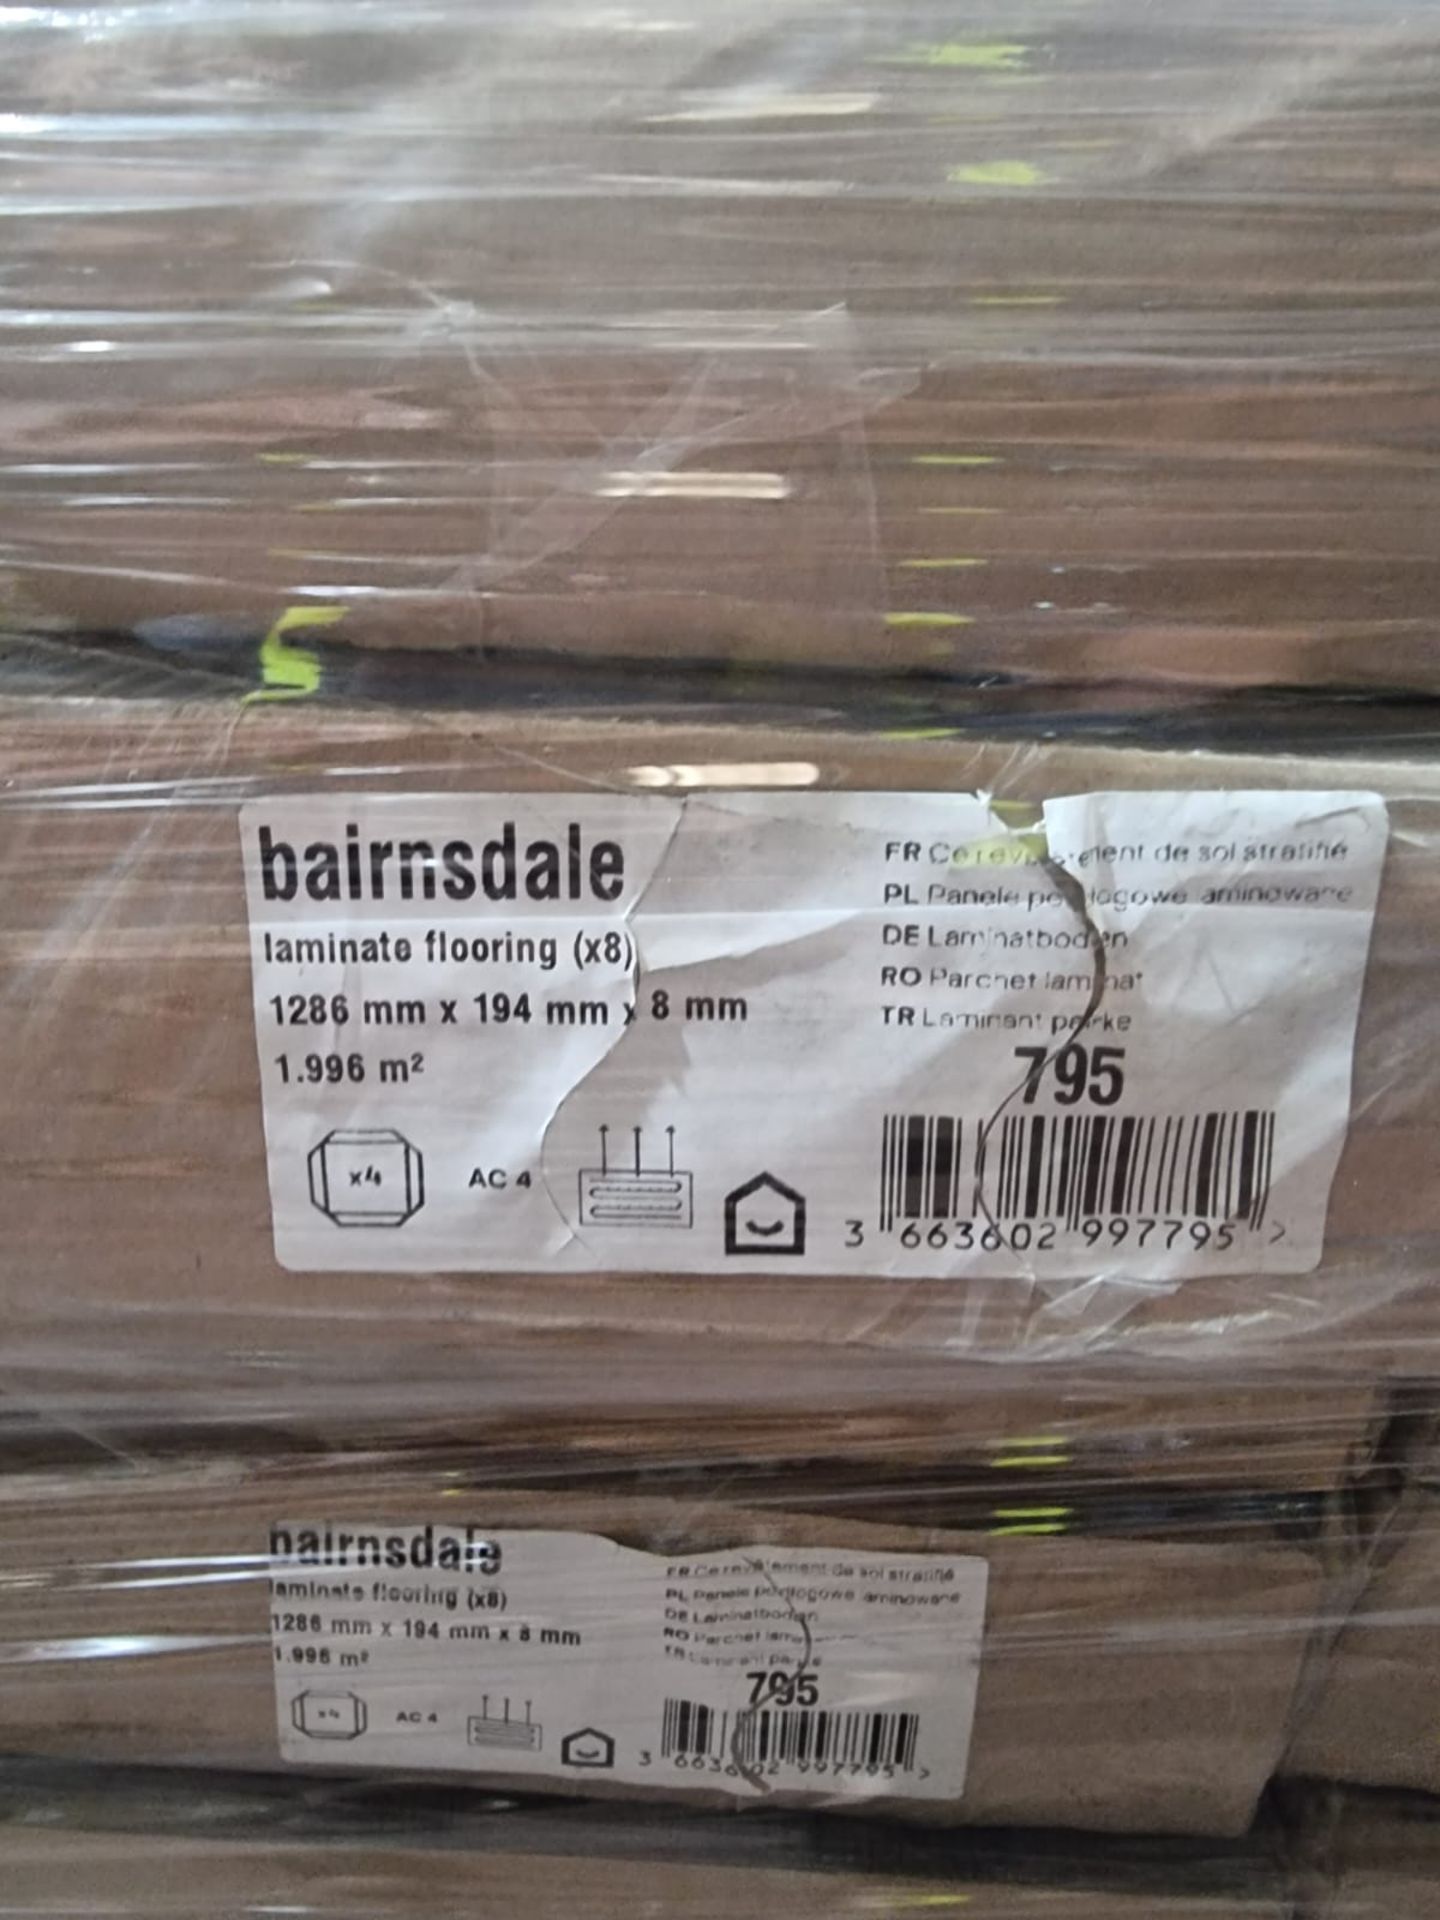 PALLET TO CONTAIN 25 X PACKS OF BAINSDALE DARK GREY WOOD LAMINATE FLOORING. EACH PACK CONTAINS 1. - Image 3 of 3